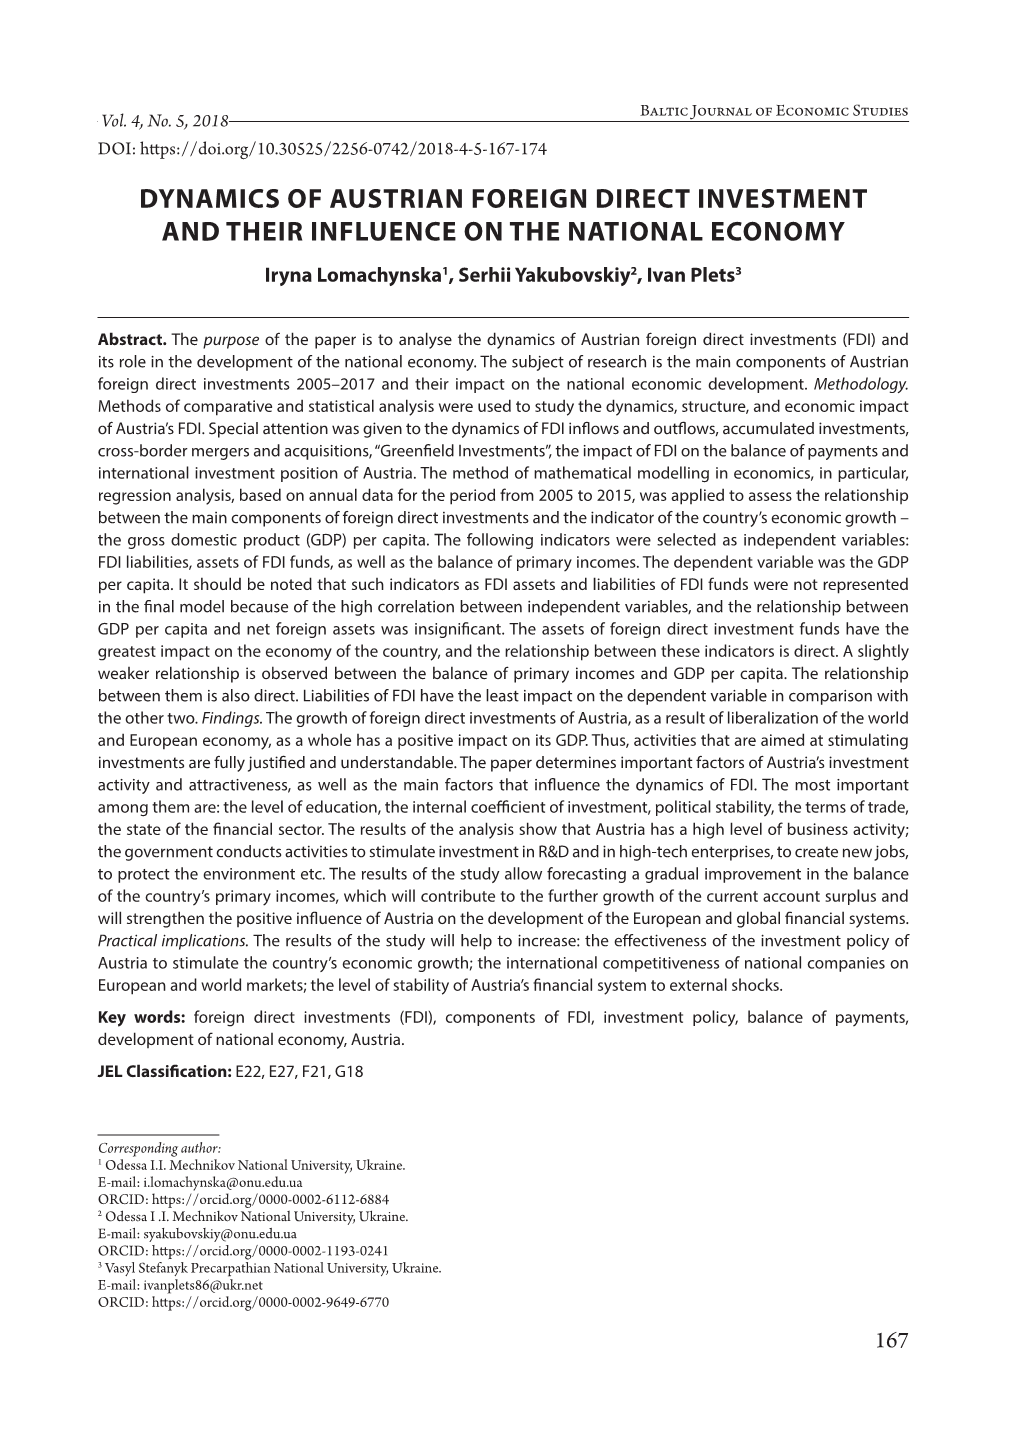 DYNAMICS of AUSTRIAN FOREIGN DIRECT INVESTMENT and THEIR INFLUENCE on the NATIONAL ECONOMY Iryna Lomachynska1, Serhii Yakubovskiy2, Ivan Plets3